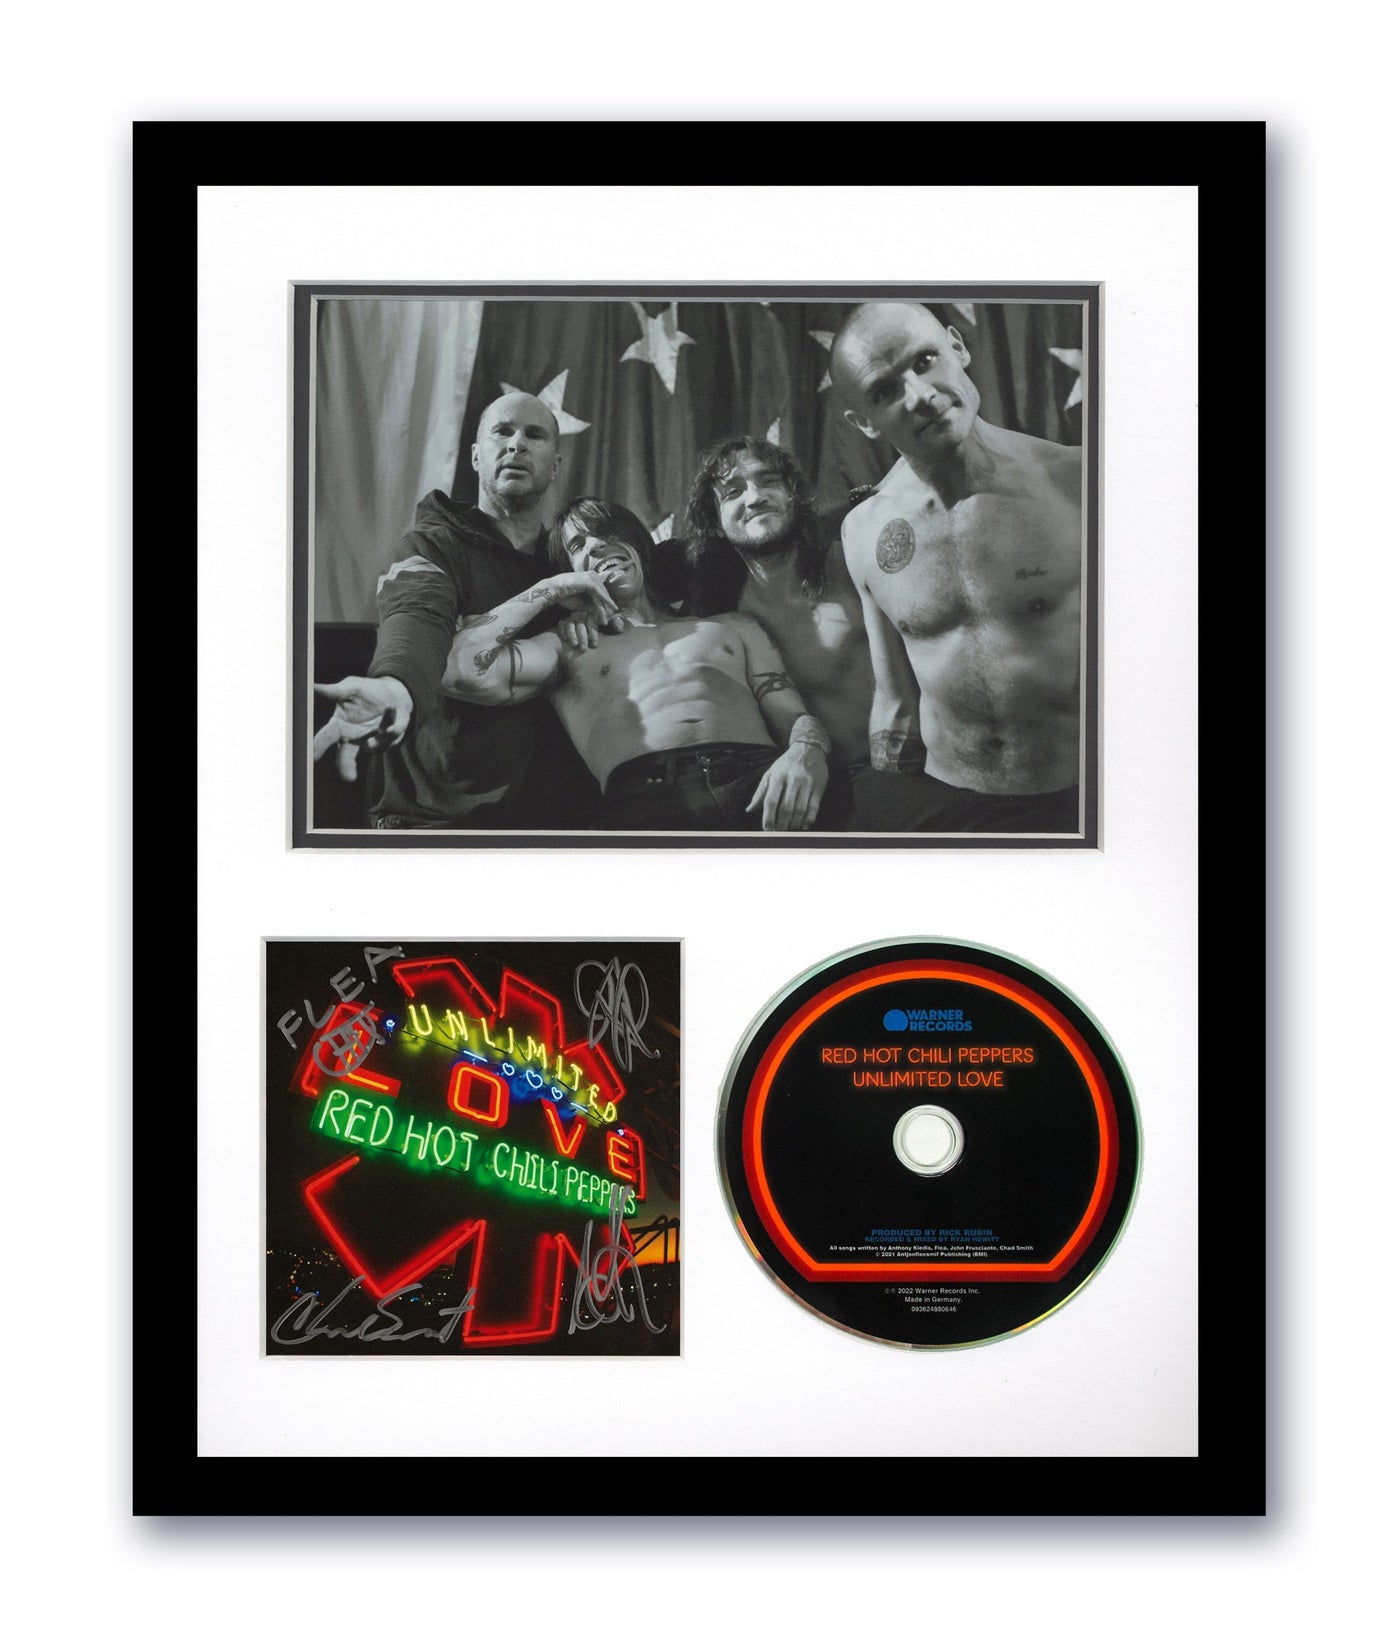 Red Hot Chili Peppers Autographed Signed 11x14 Framed CD Unlimited Love ACOA